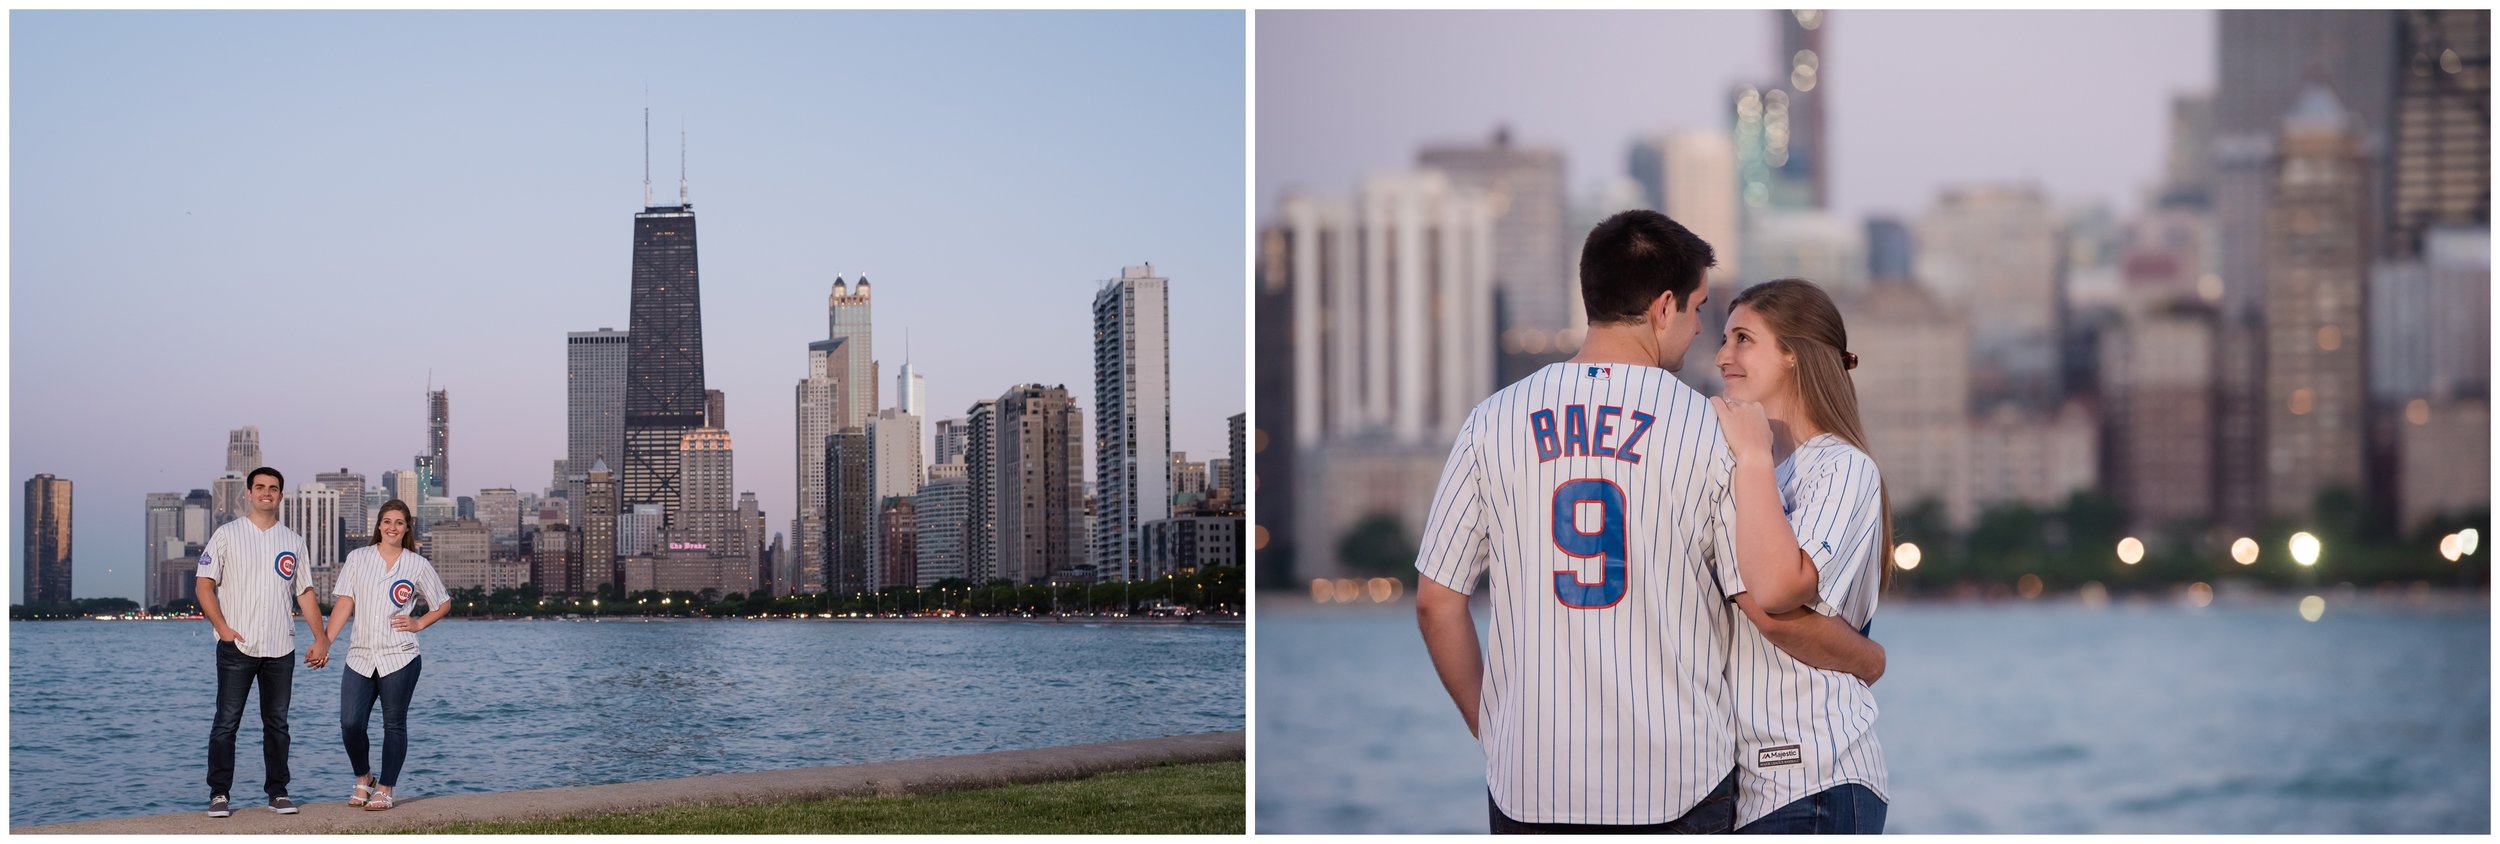 North ave. Beach Chicago Engagement Photos